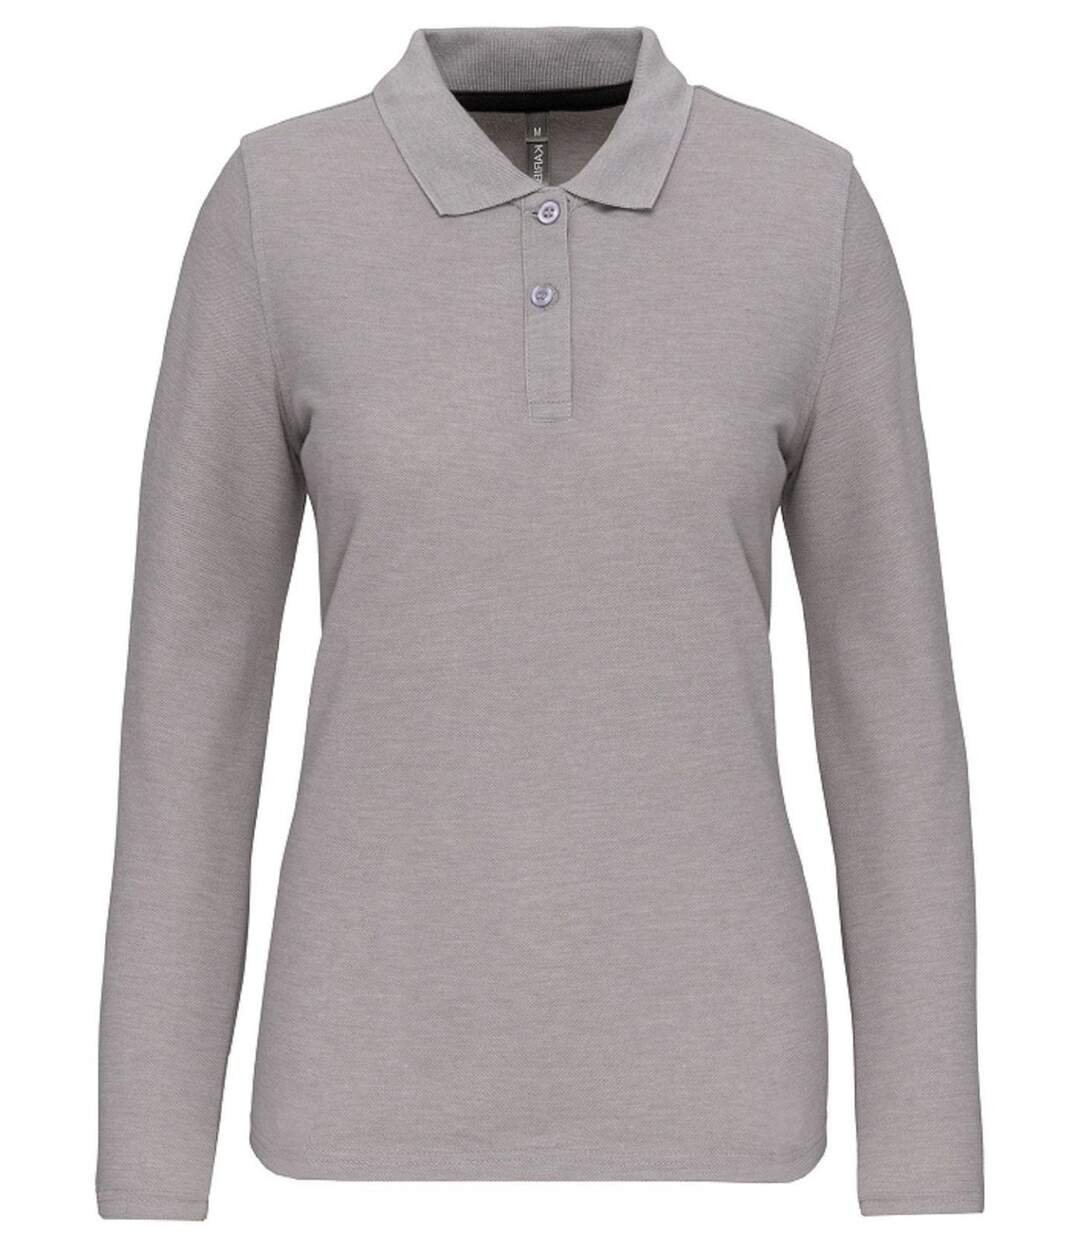 Polo manches longues - Femme - WK277 - gris oxford